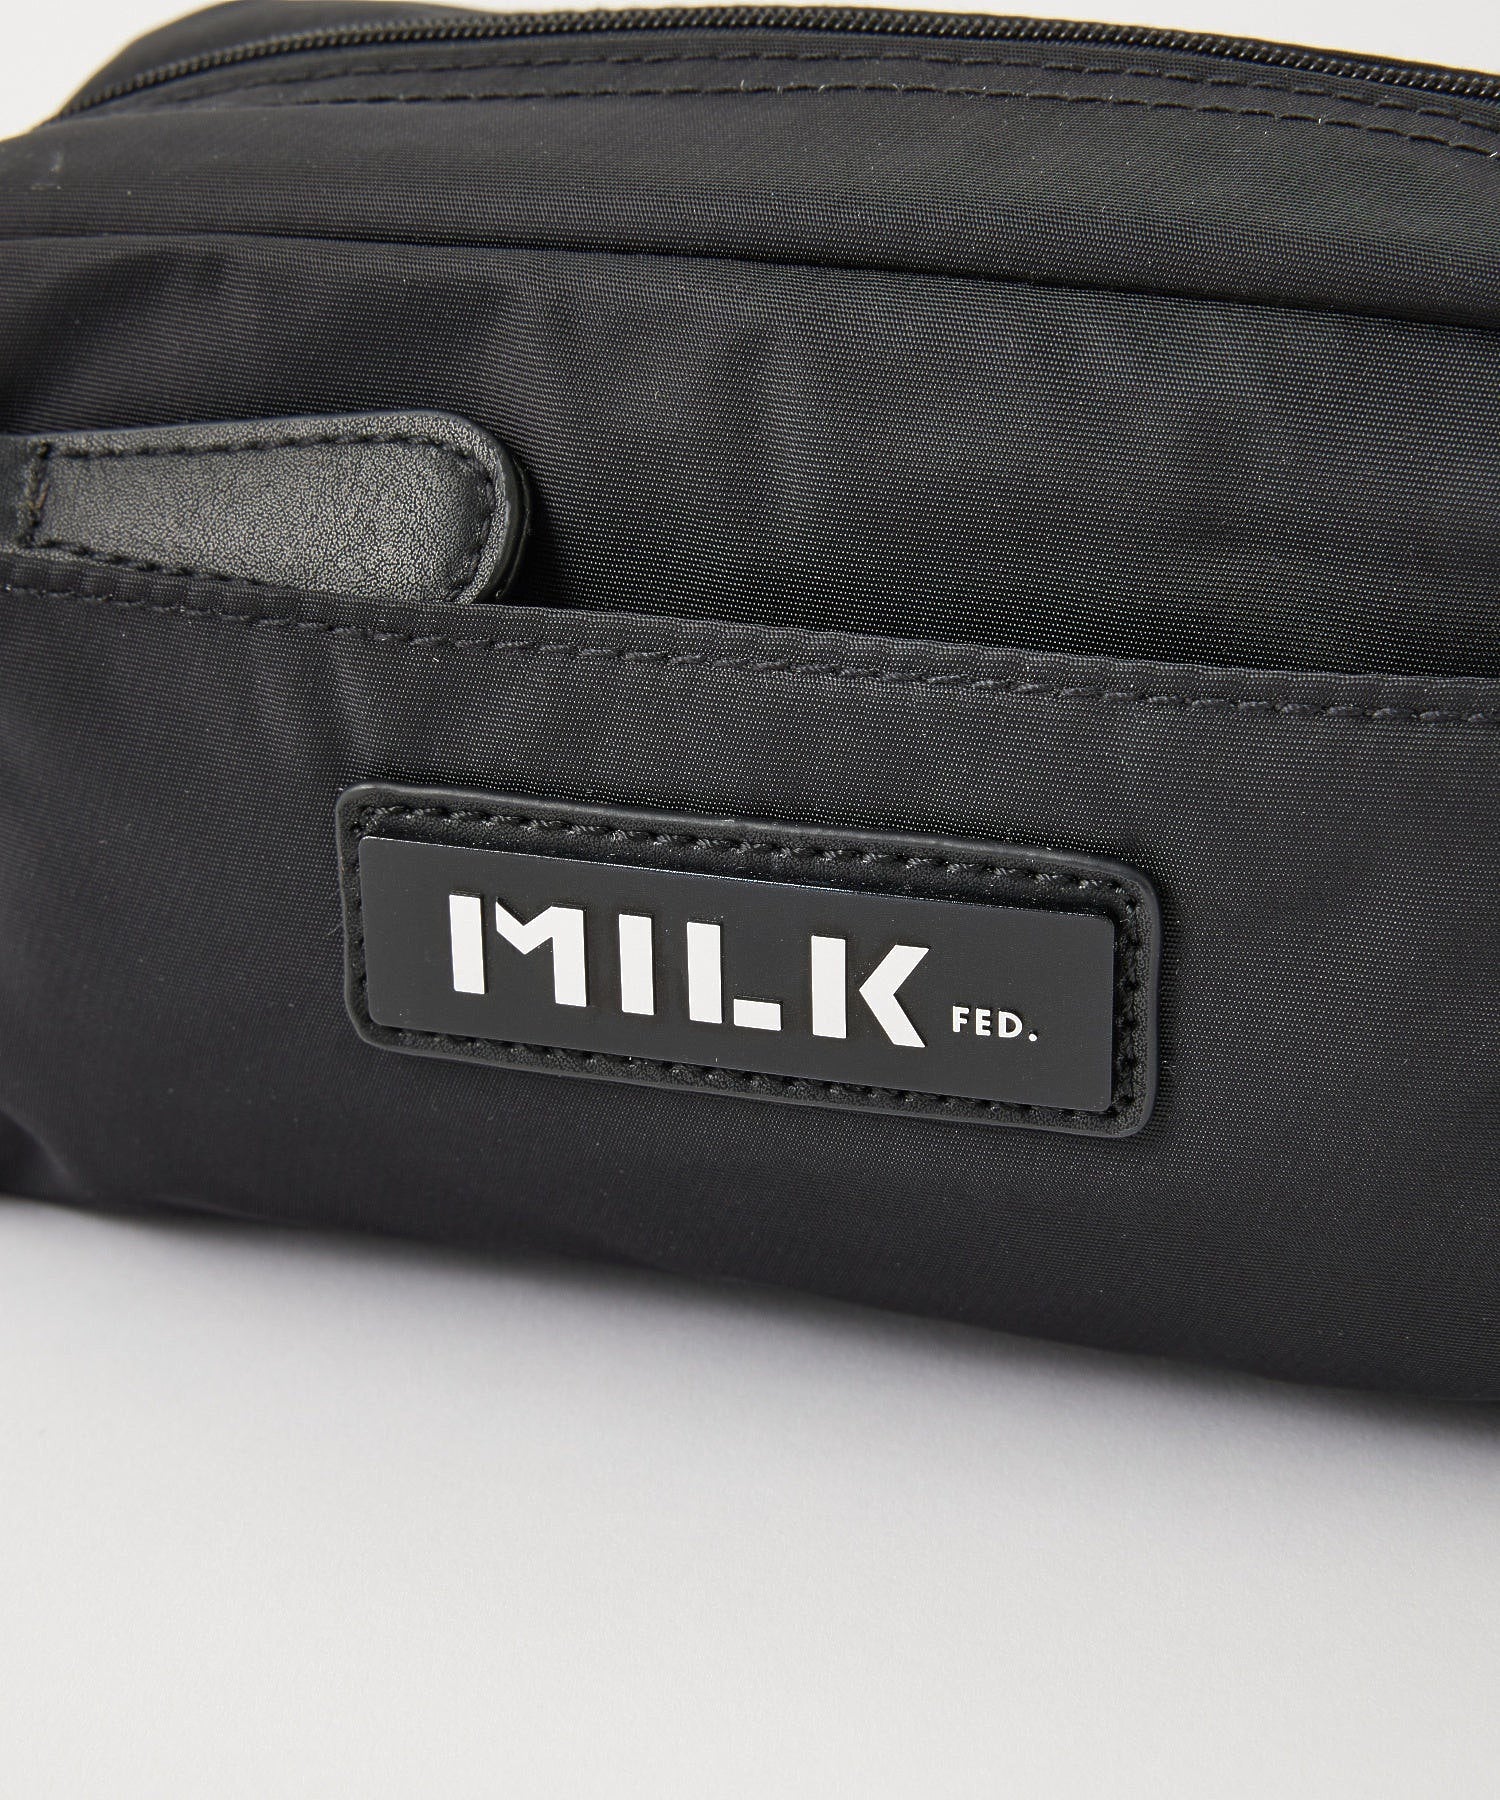 LOGO PLATE POUCH MILKFED.